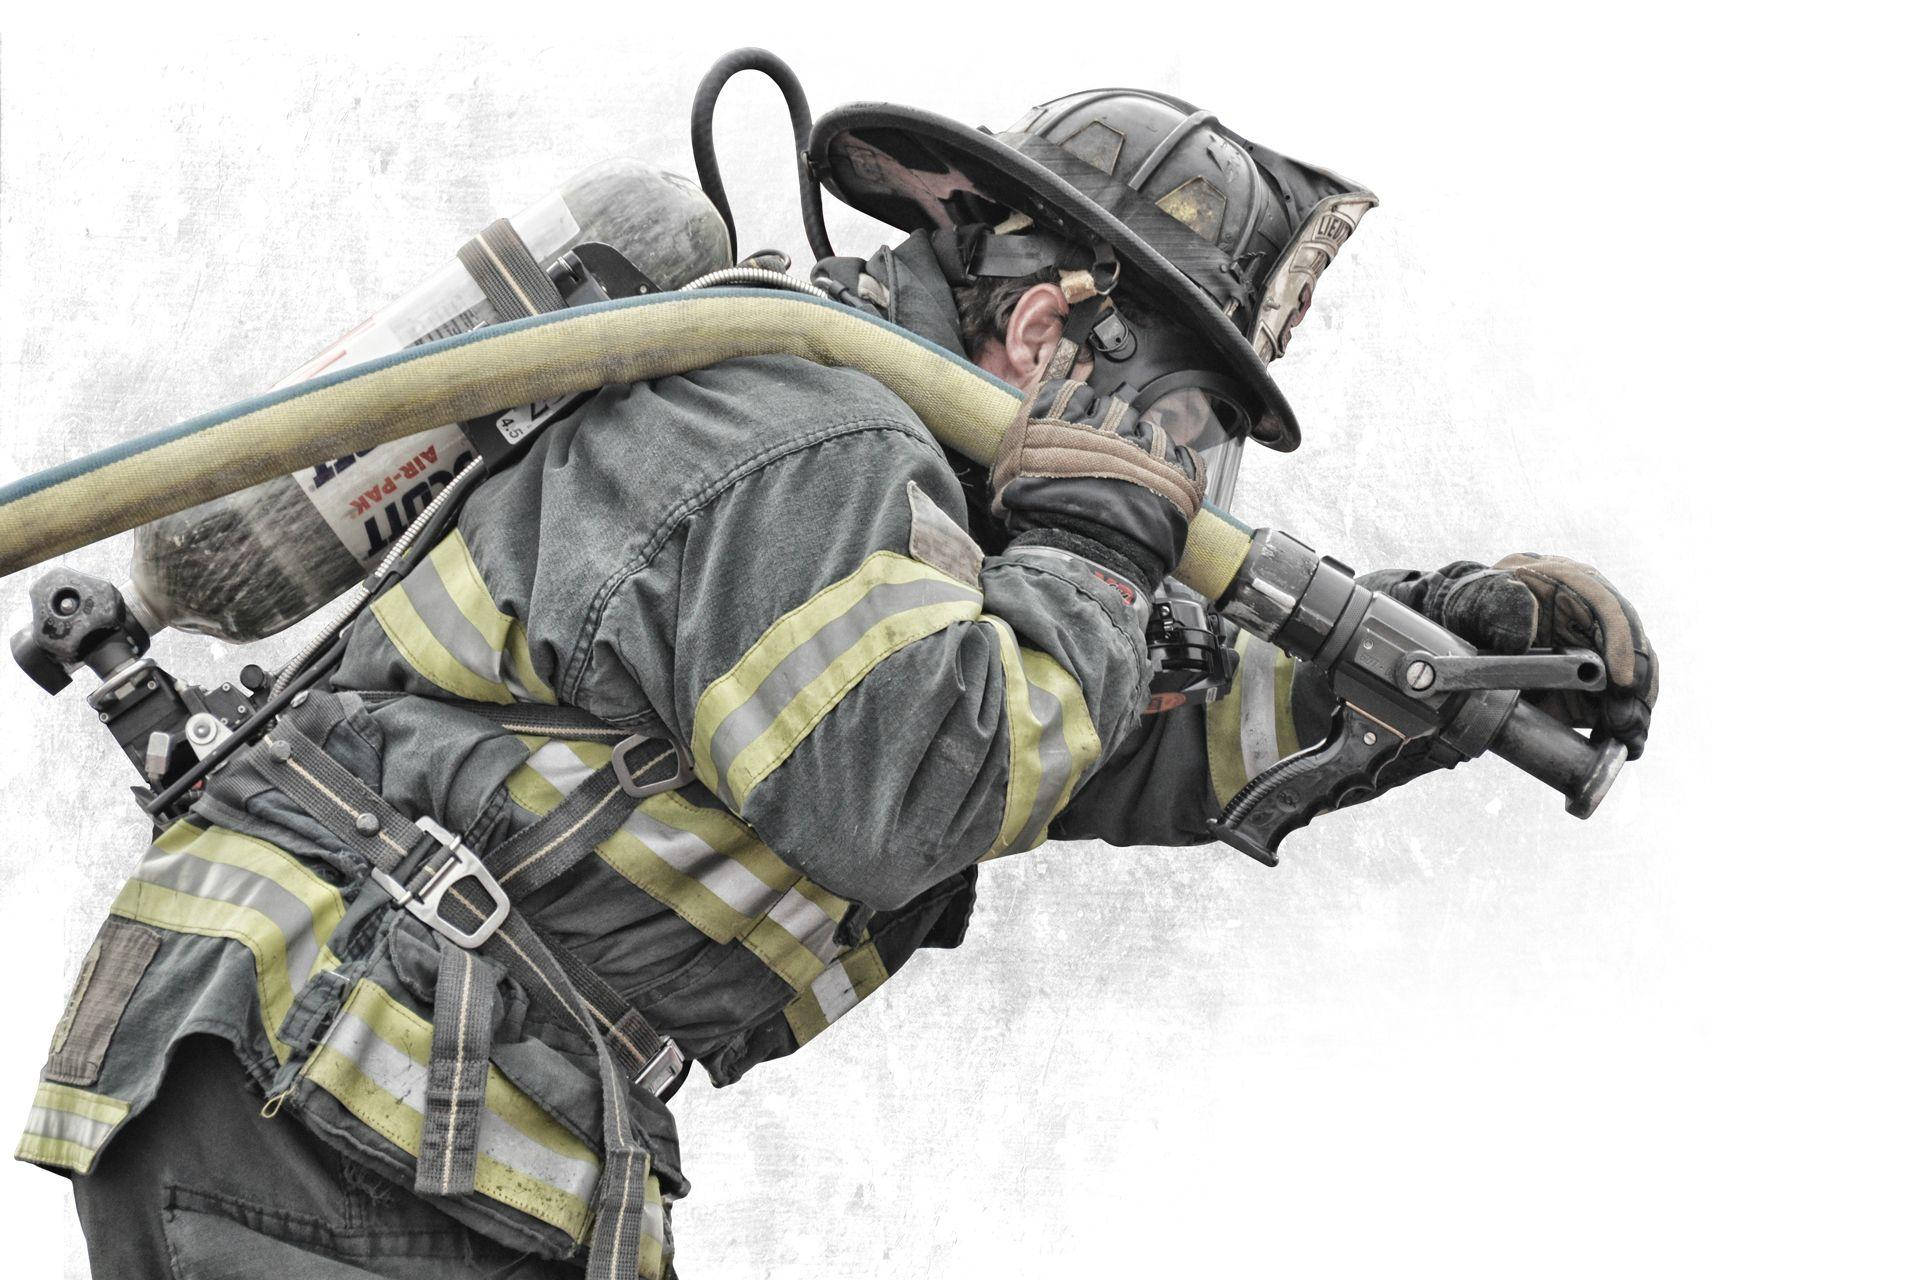 Heroic Firefighters With Water Hose Wallpaper